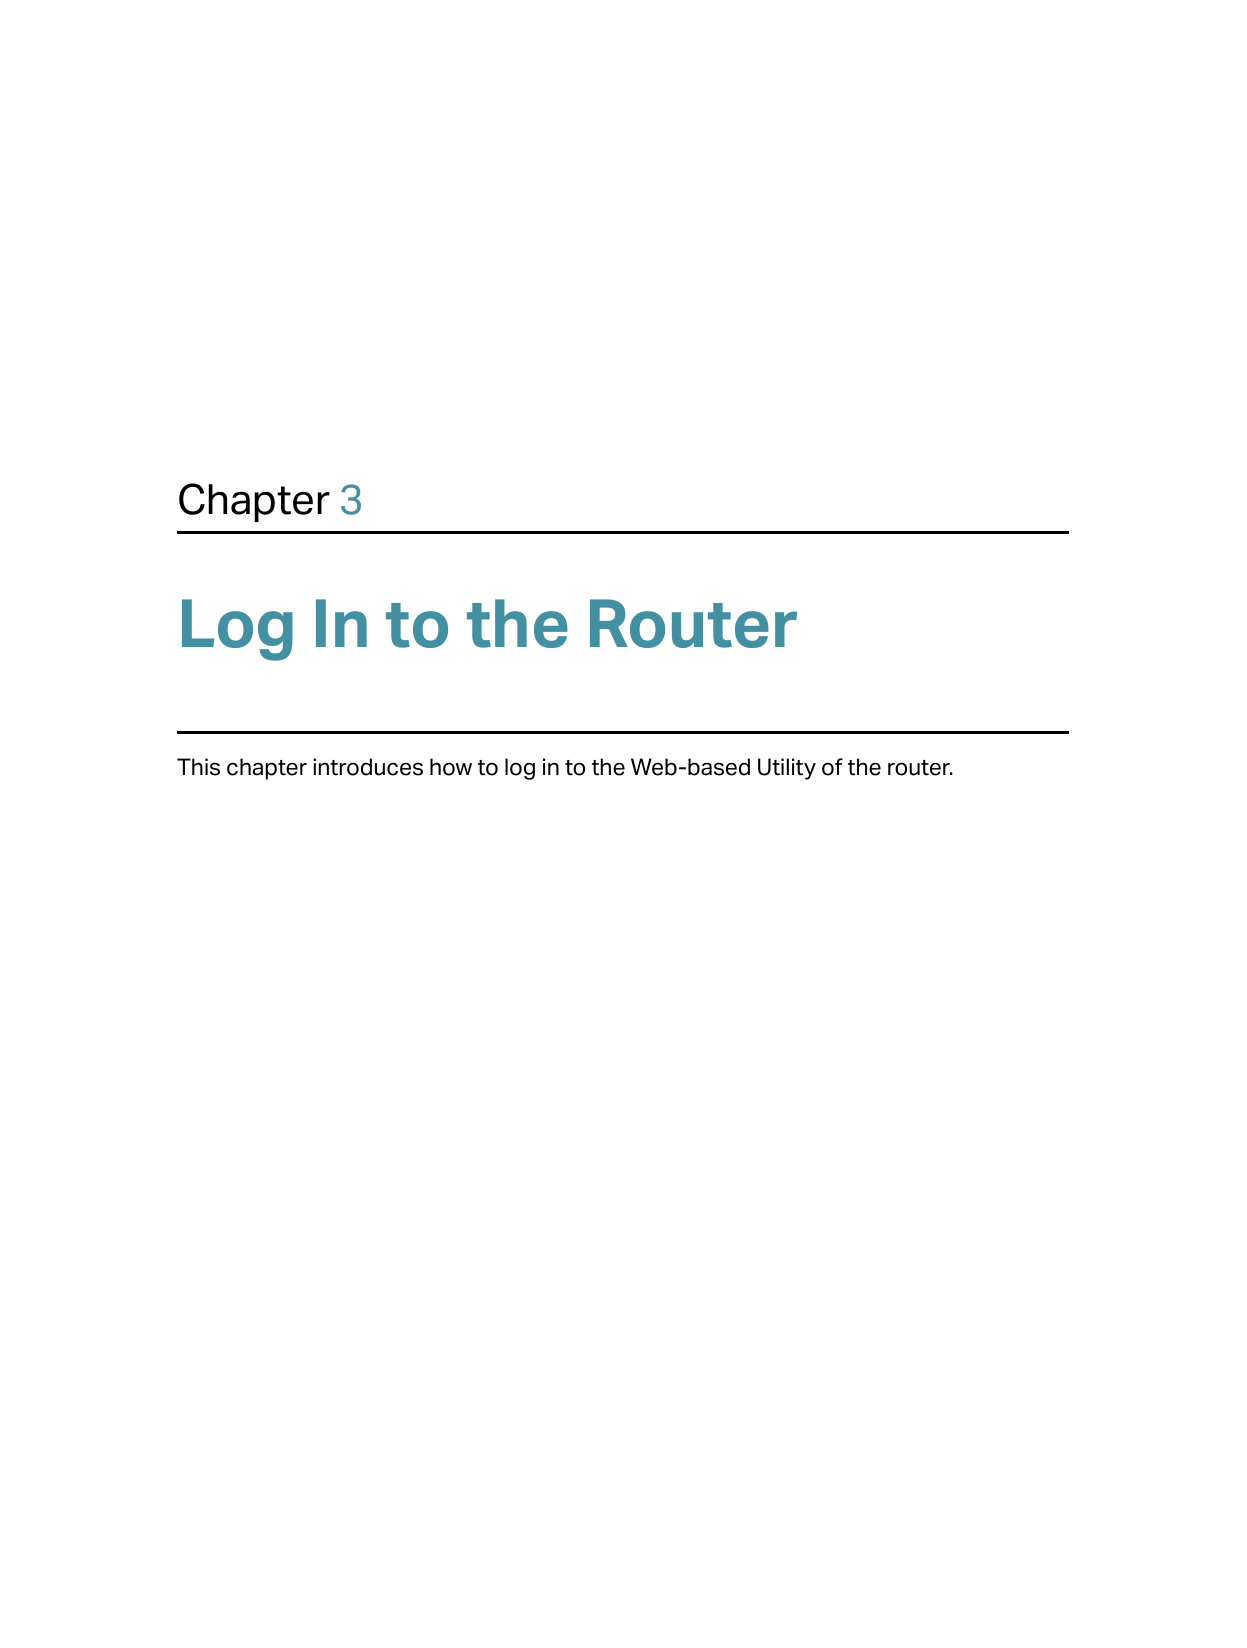 Chapter 3Log In to the RouterThis chapter introduces how to log in to the Web-based Utility of the router.  